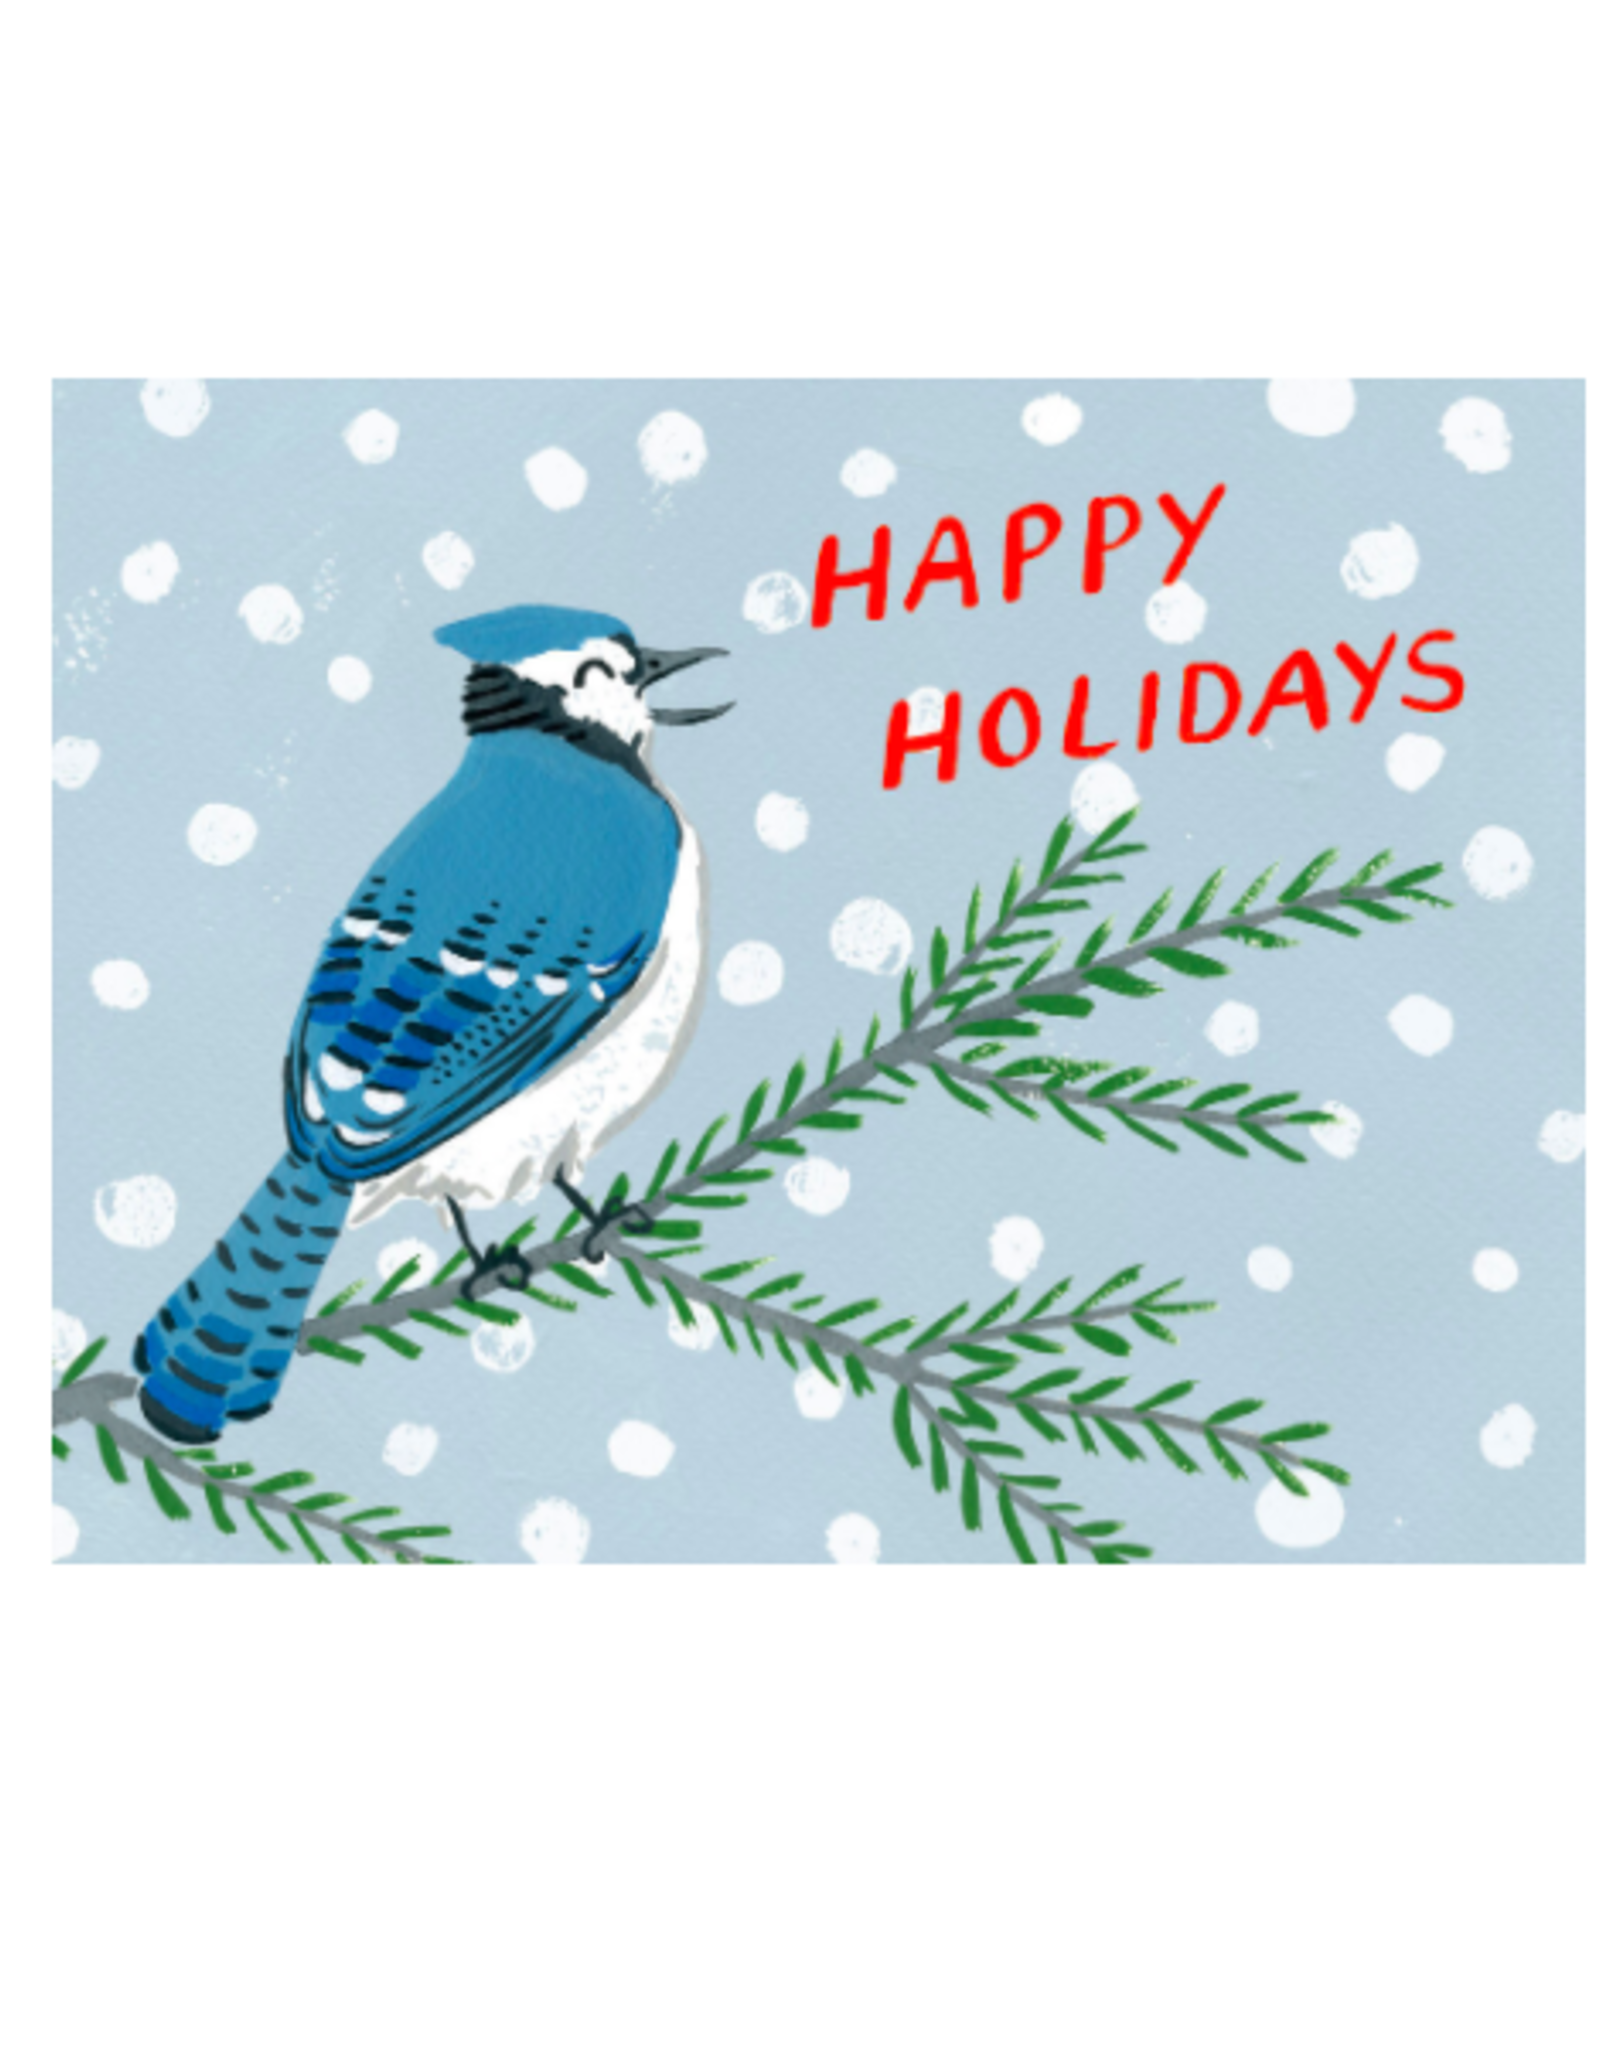 Kat Frick Miller - Boxed Holiday Cards / Set of 6, Happy Holidays Blue Jay, 4.25 x 5.5"